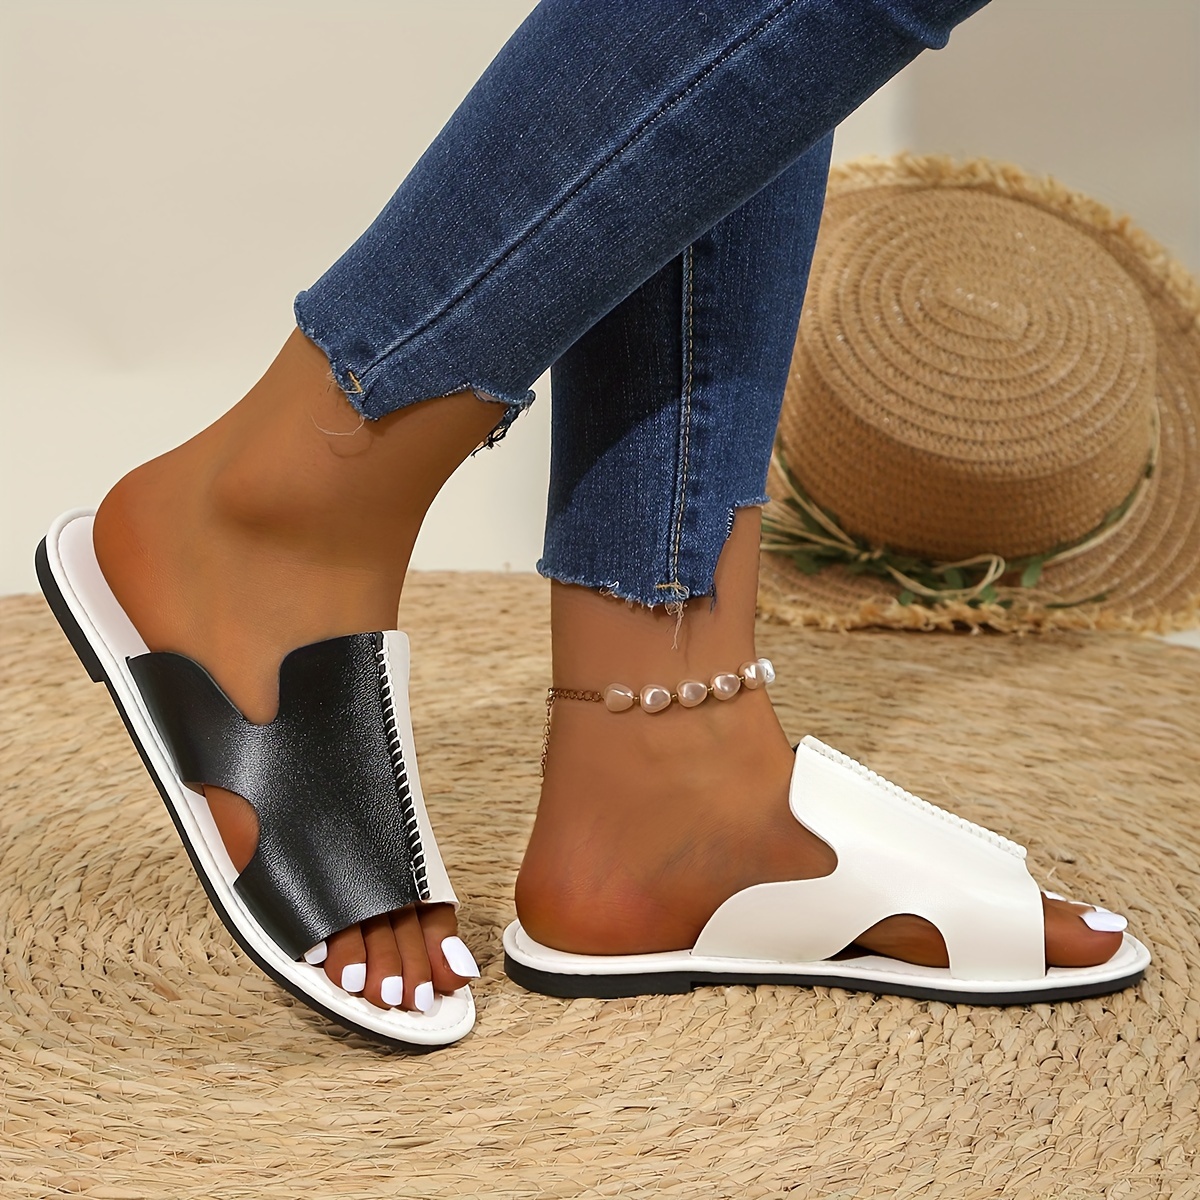 

Women's Two-tone Slide Sandals, Fashionable Comfortable Casual Ladies Slides, Indoor & Outdoor Soft Sole Flat Slides